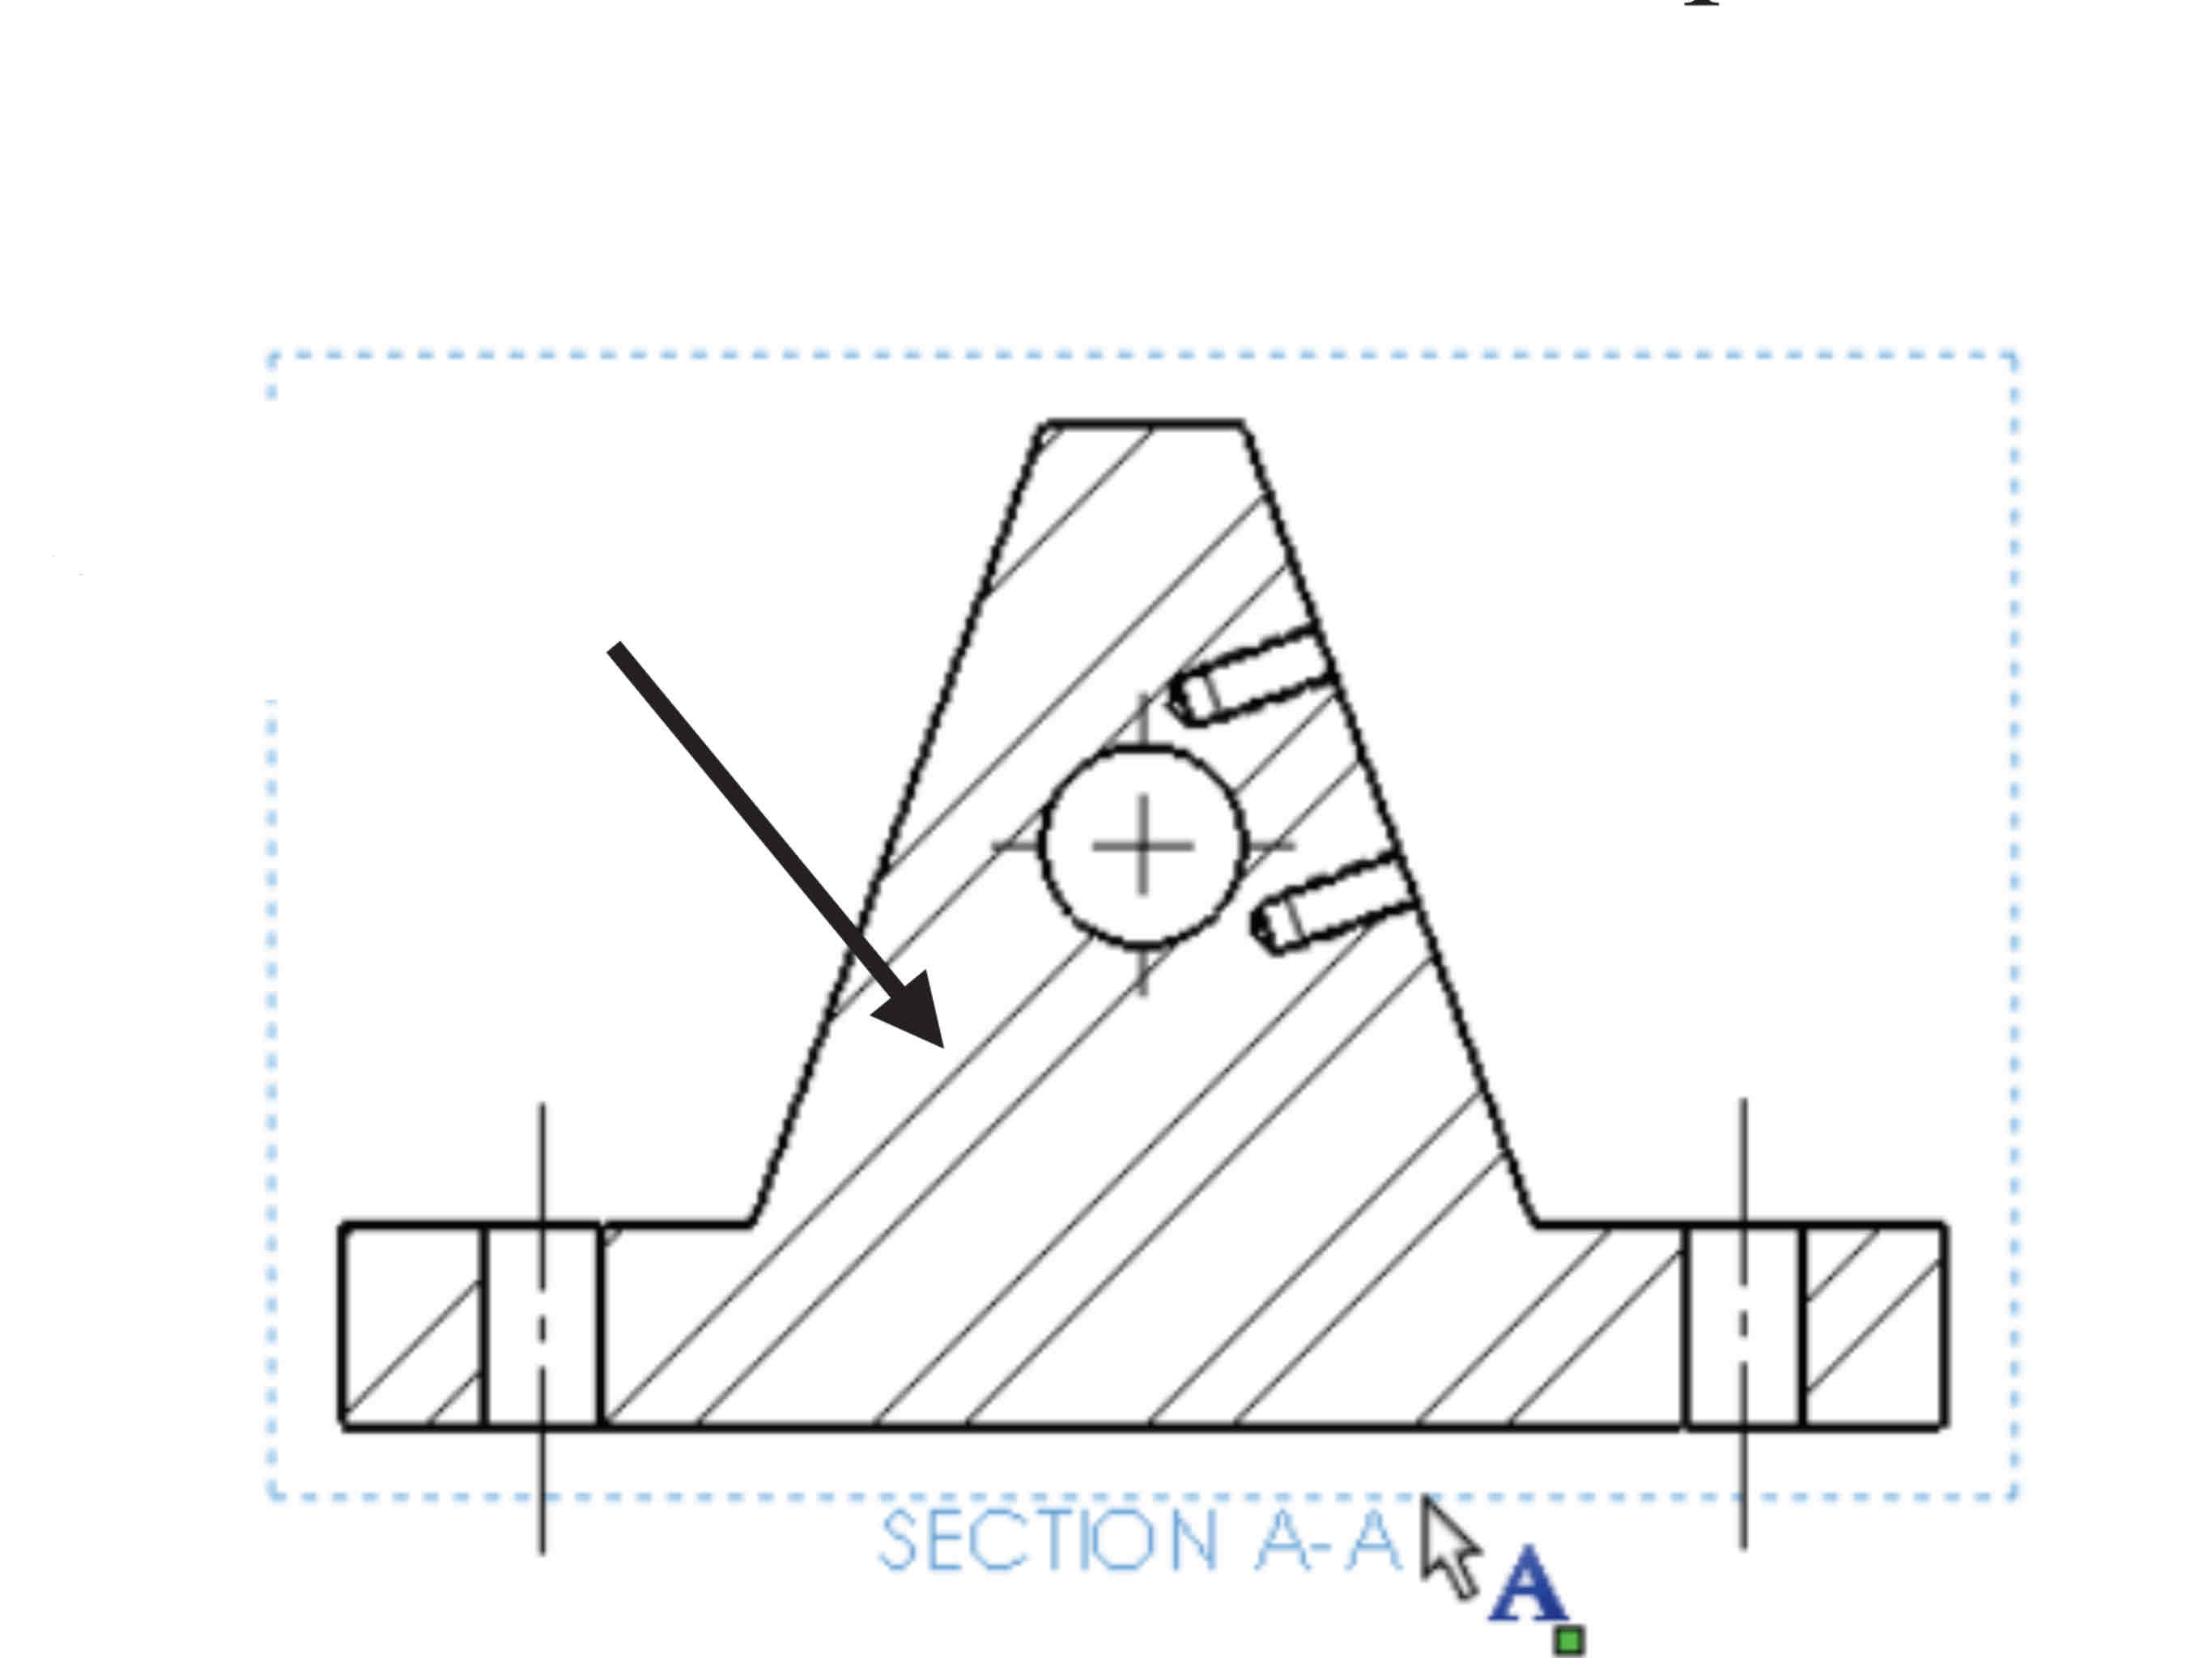 <p>Thin, uniformly spaced lines that indicate exposed cut surfaces of an object in a sectional view.</p>